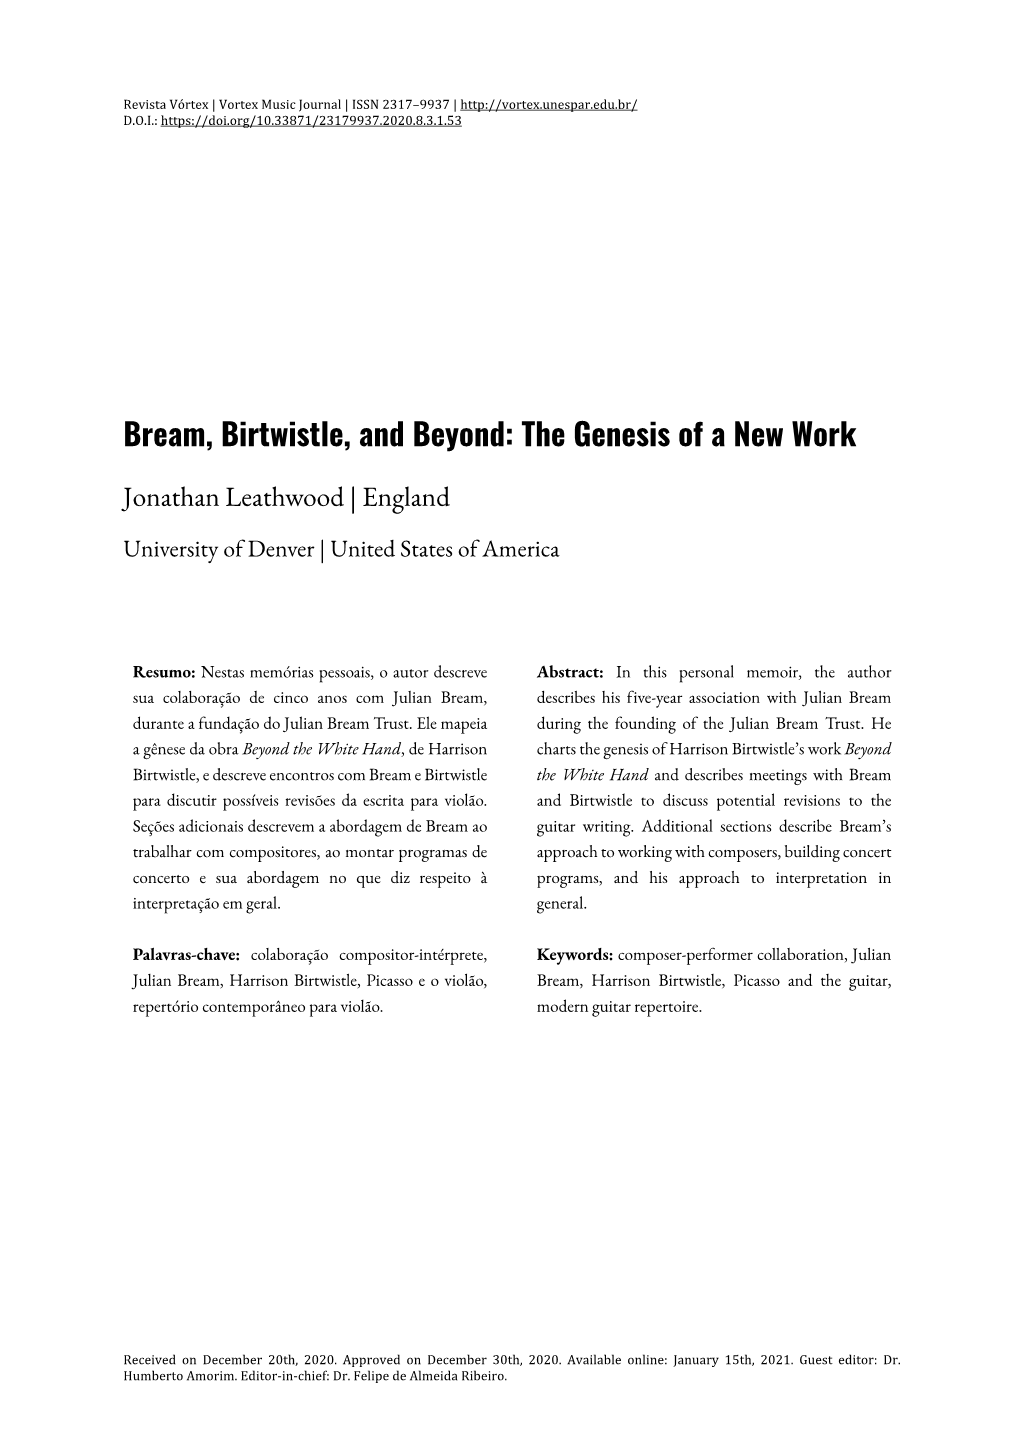 Bream, Birtwistle, and Beyond: the Genesis of a New Work